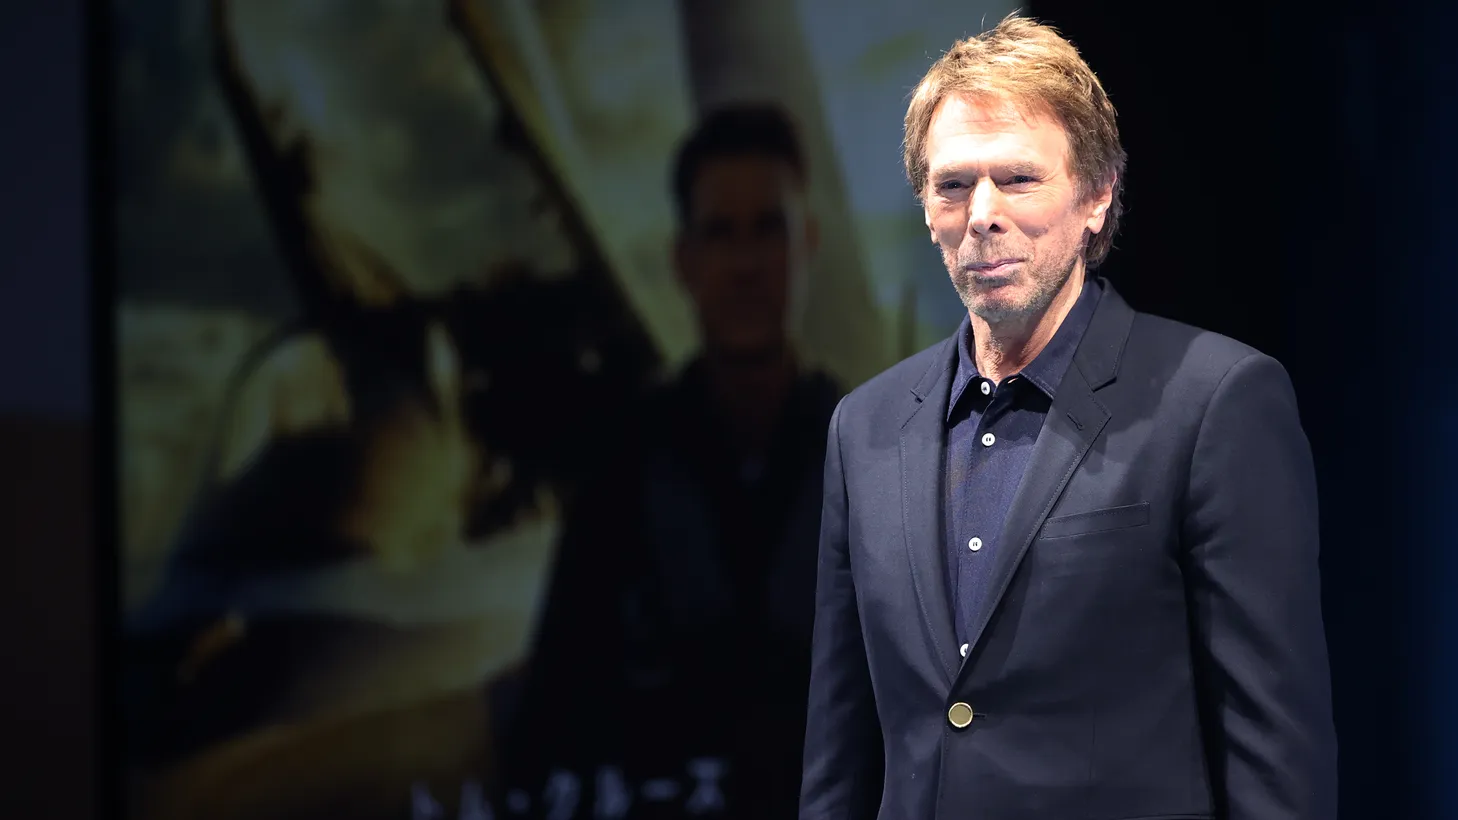 Producer Jerry Bruckheimer attends a press conference to speak about “Top Gun: Maverick” in Tokyo on May 23, 2022.